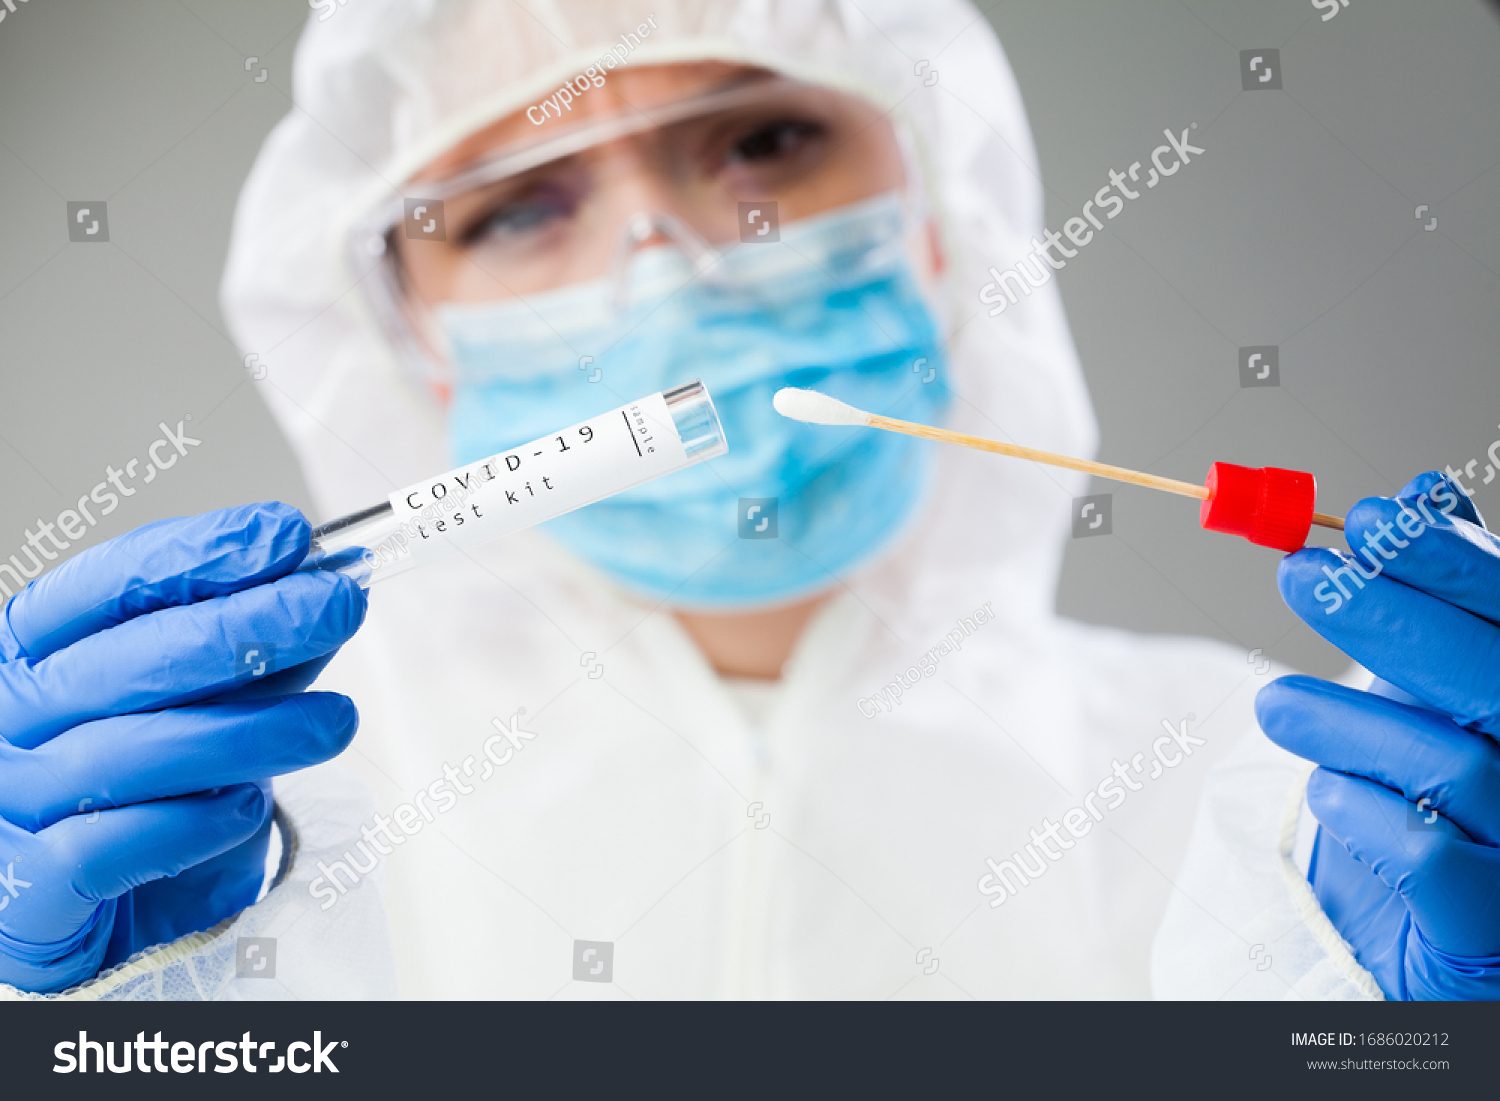 Medical healthcare NHS technician holding COVID-19 swab collection kit,wearing white PPE protective suit mask gloves,test tube for taking OP NP patient specimen sample,PCR DNA testing protocol process #1686020212